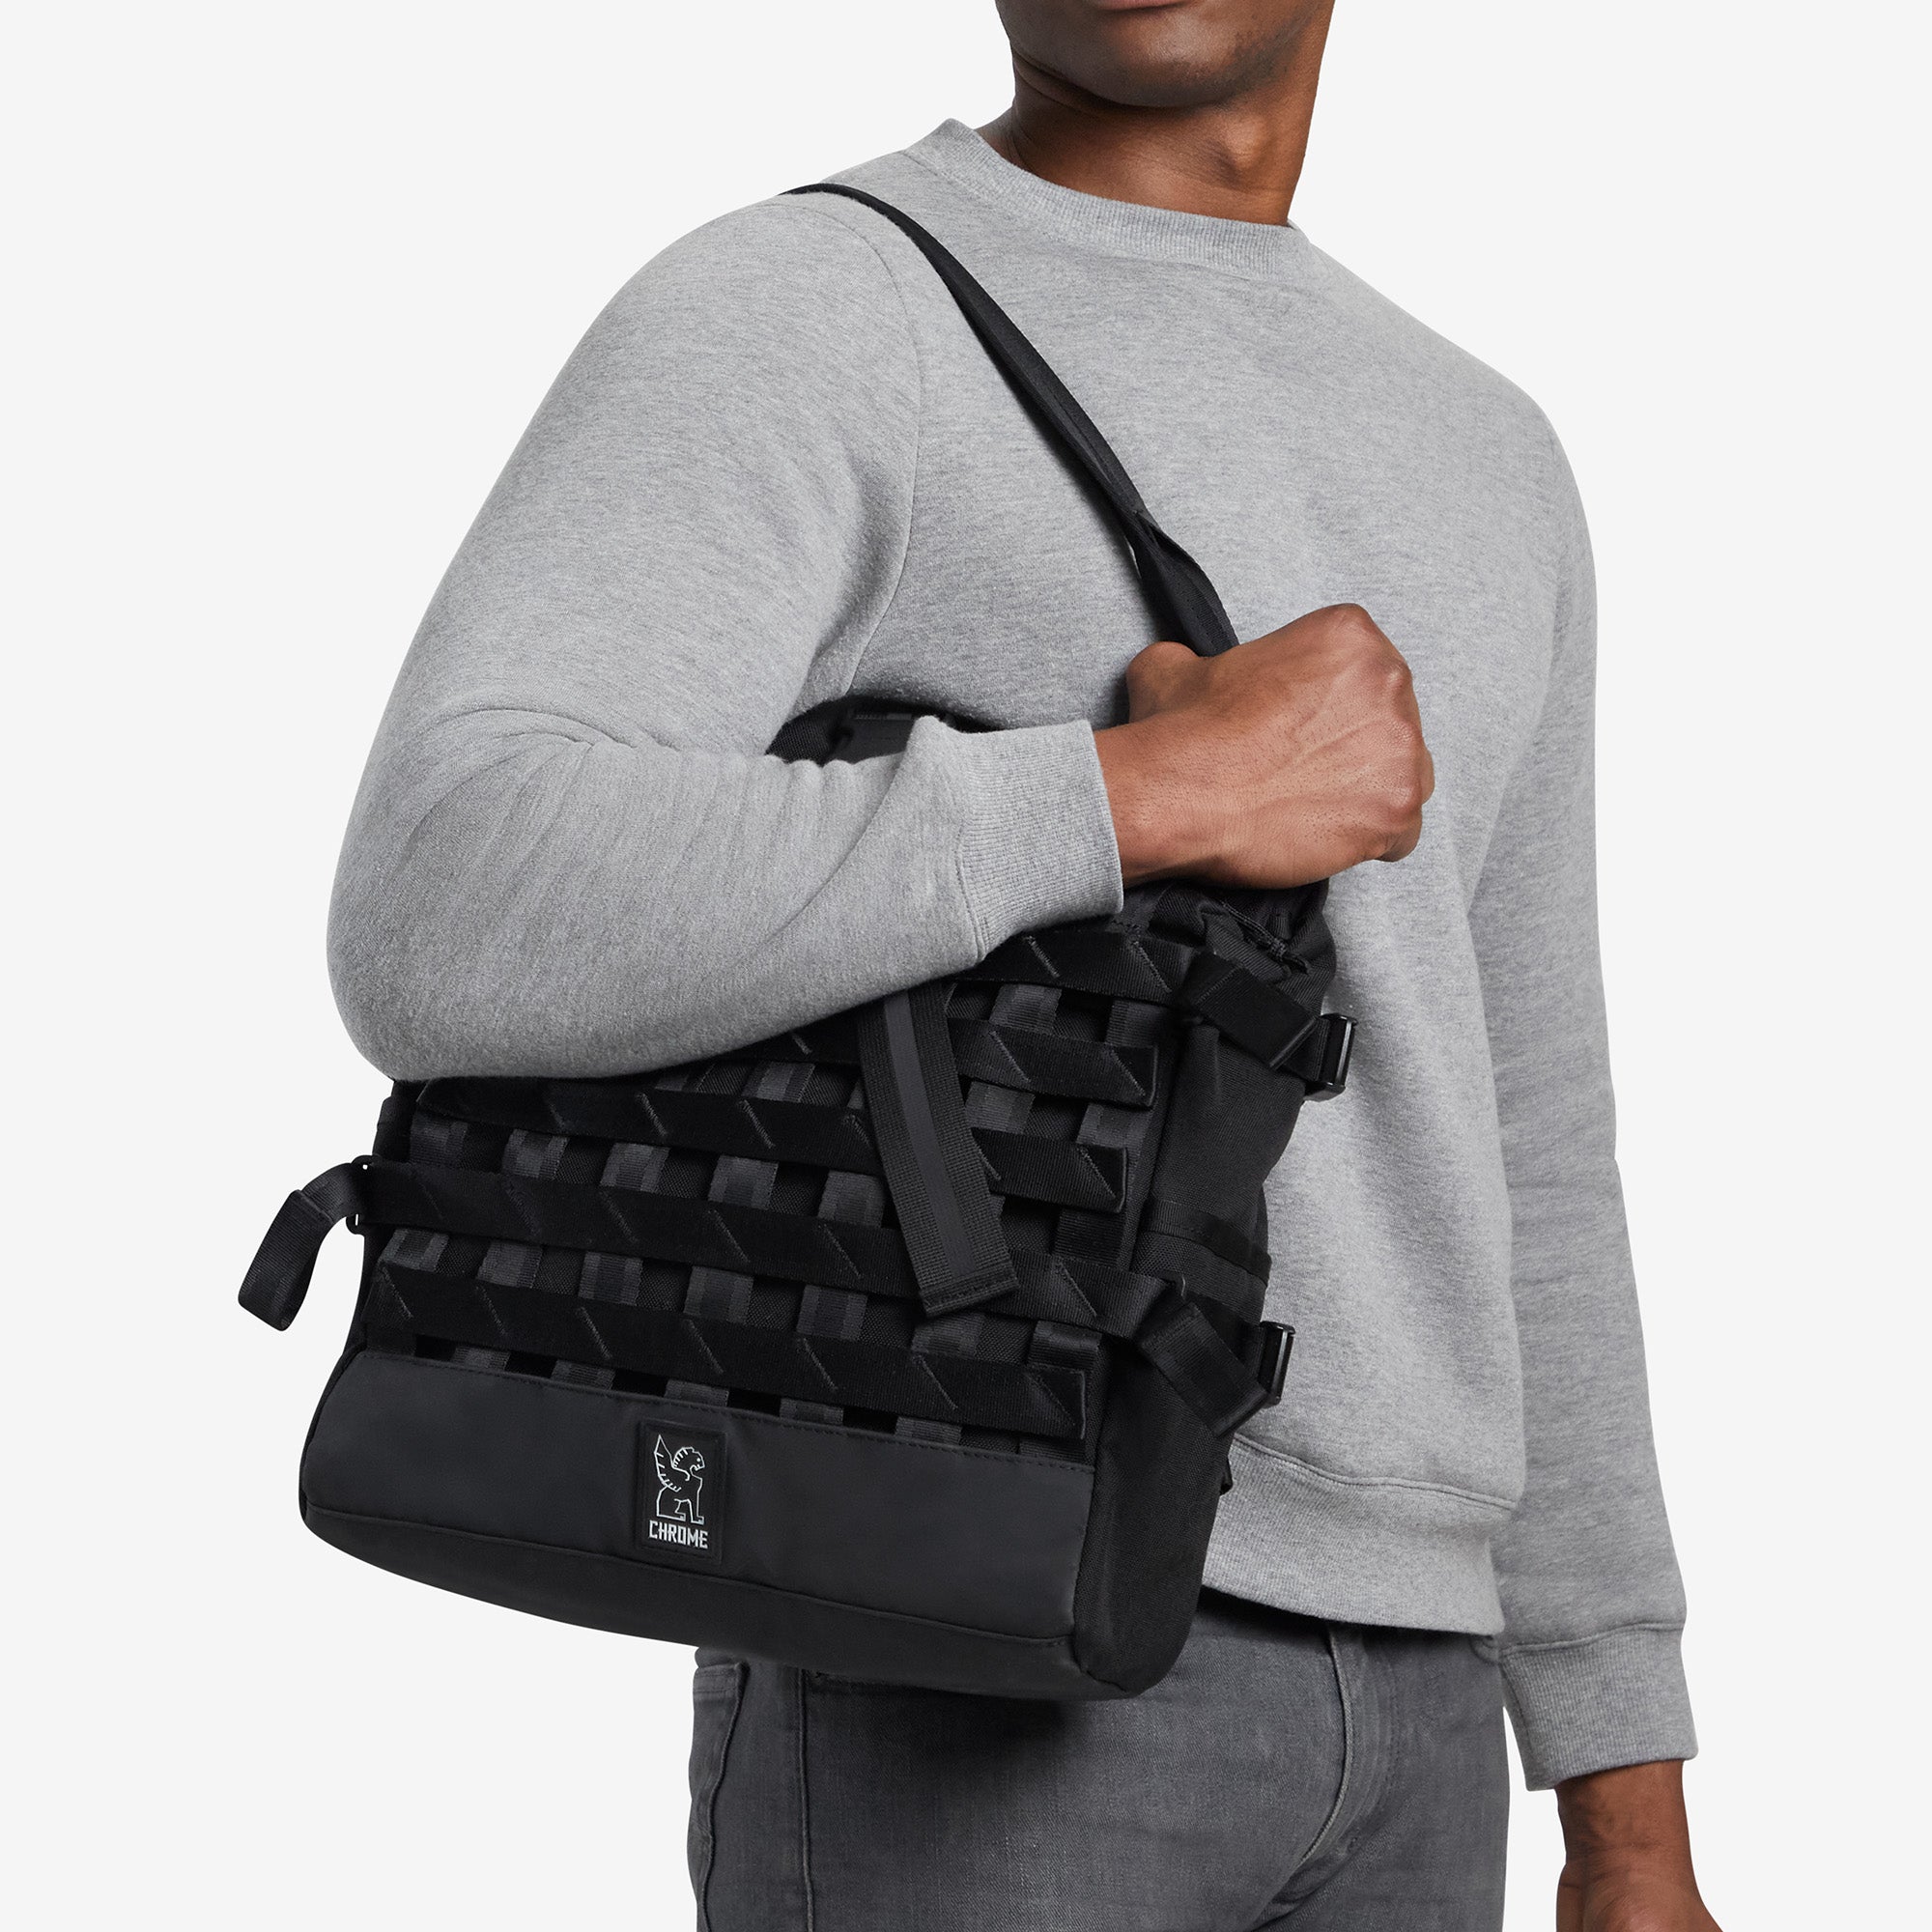 Barrage tote in black worn by a guy on the shoulder